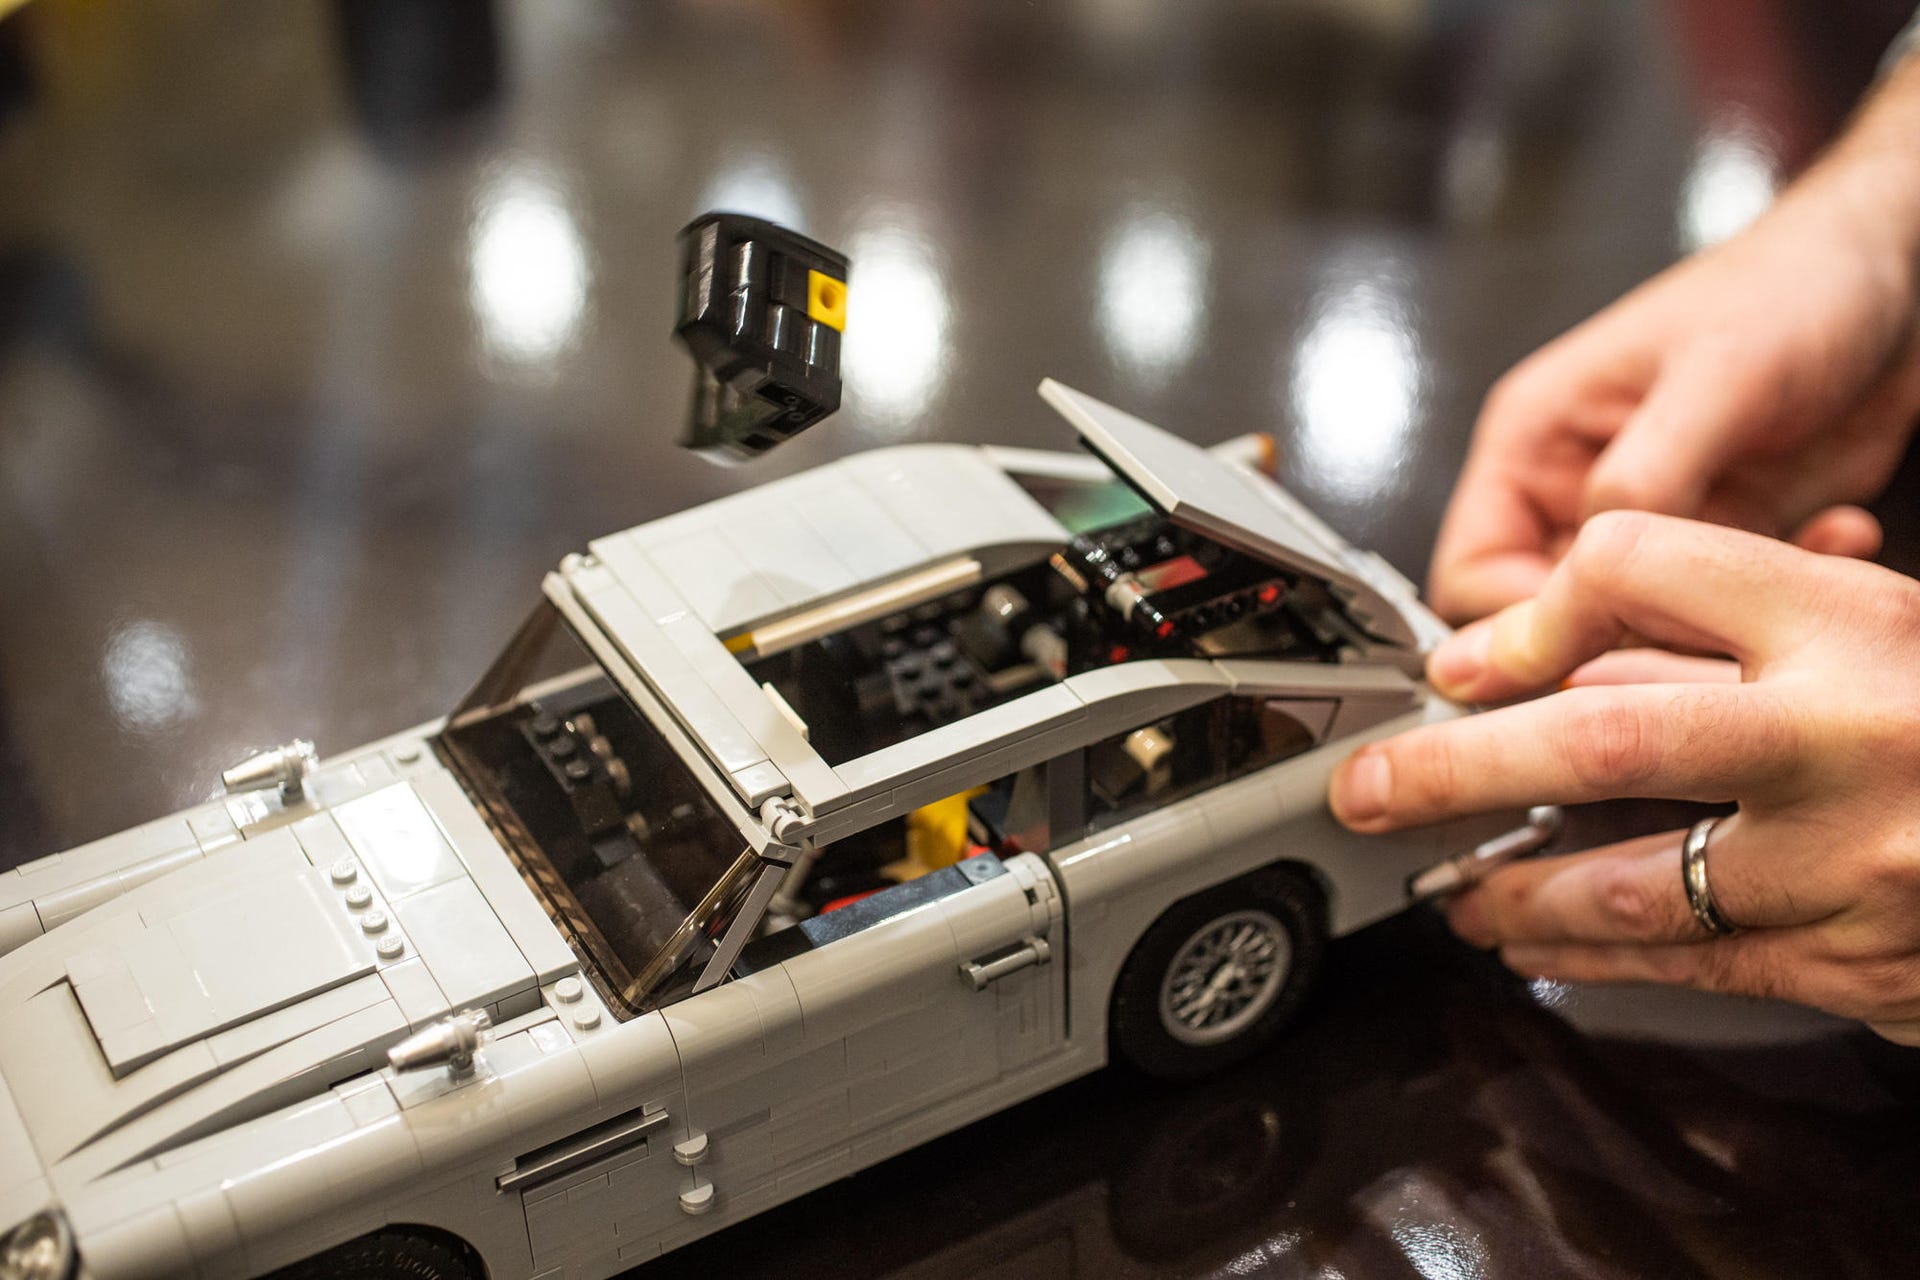 halvkugle prototype ovn Lego James Bond Aston Martin DB5 thrills with working ejector seat - CNET